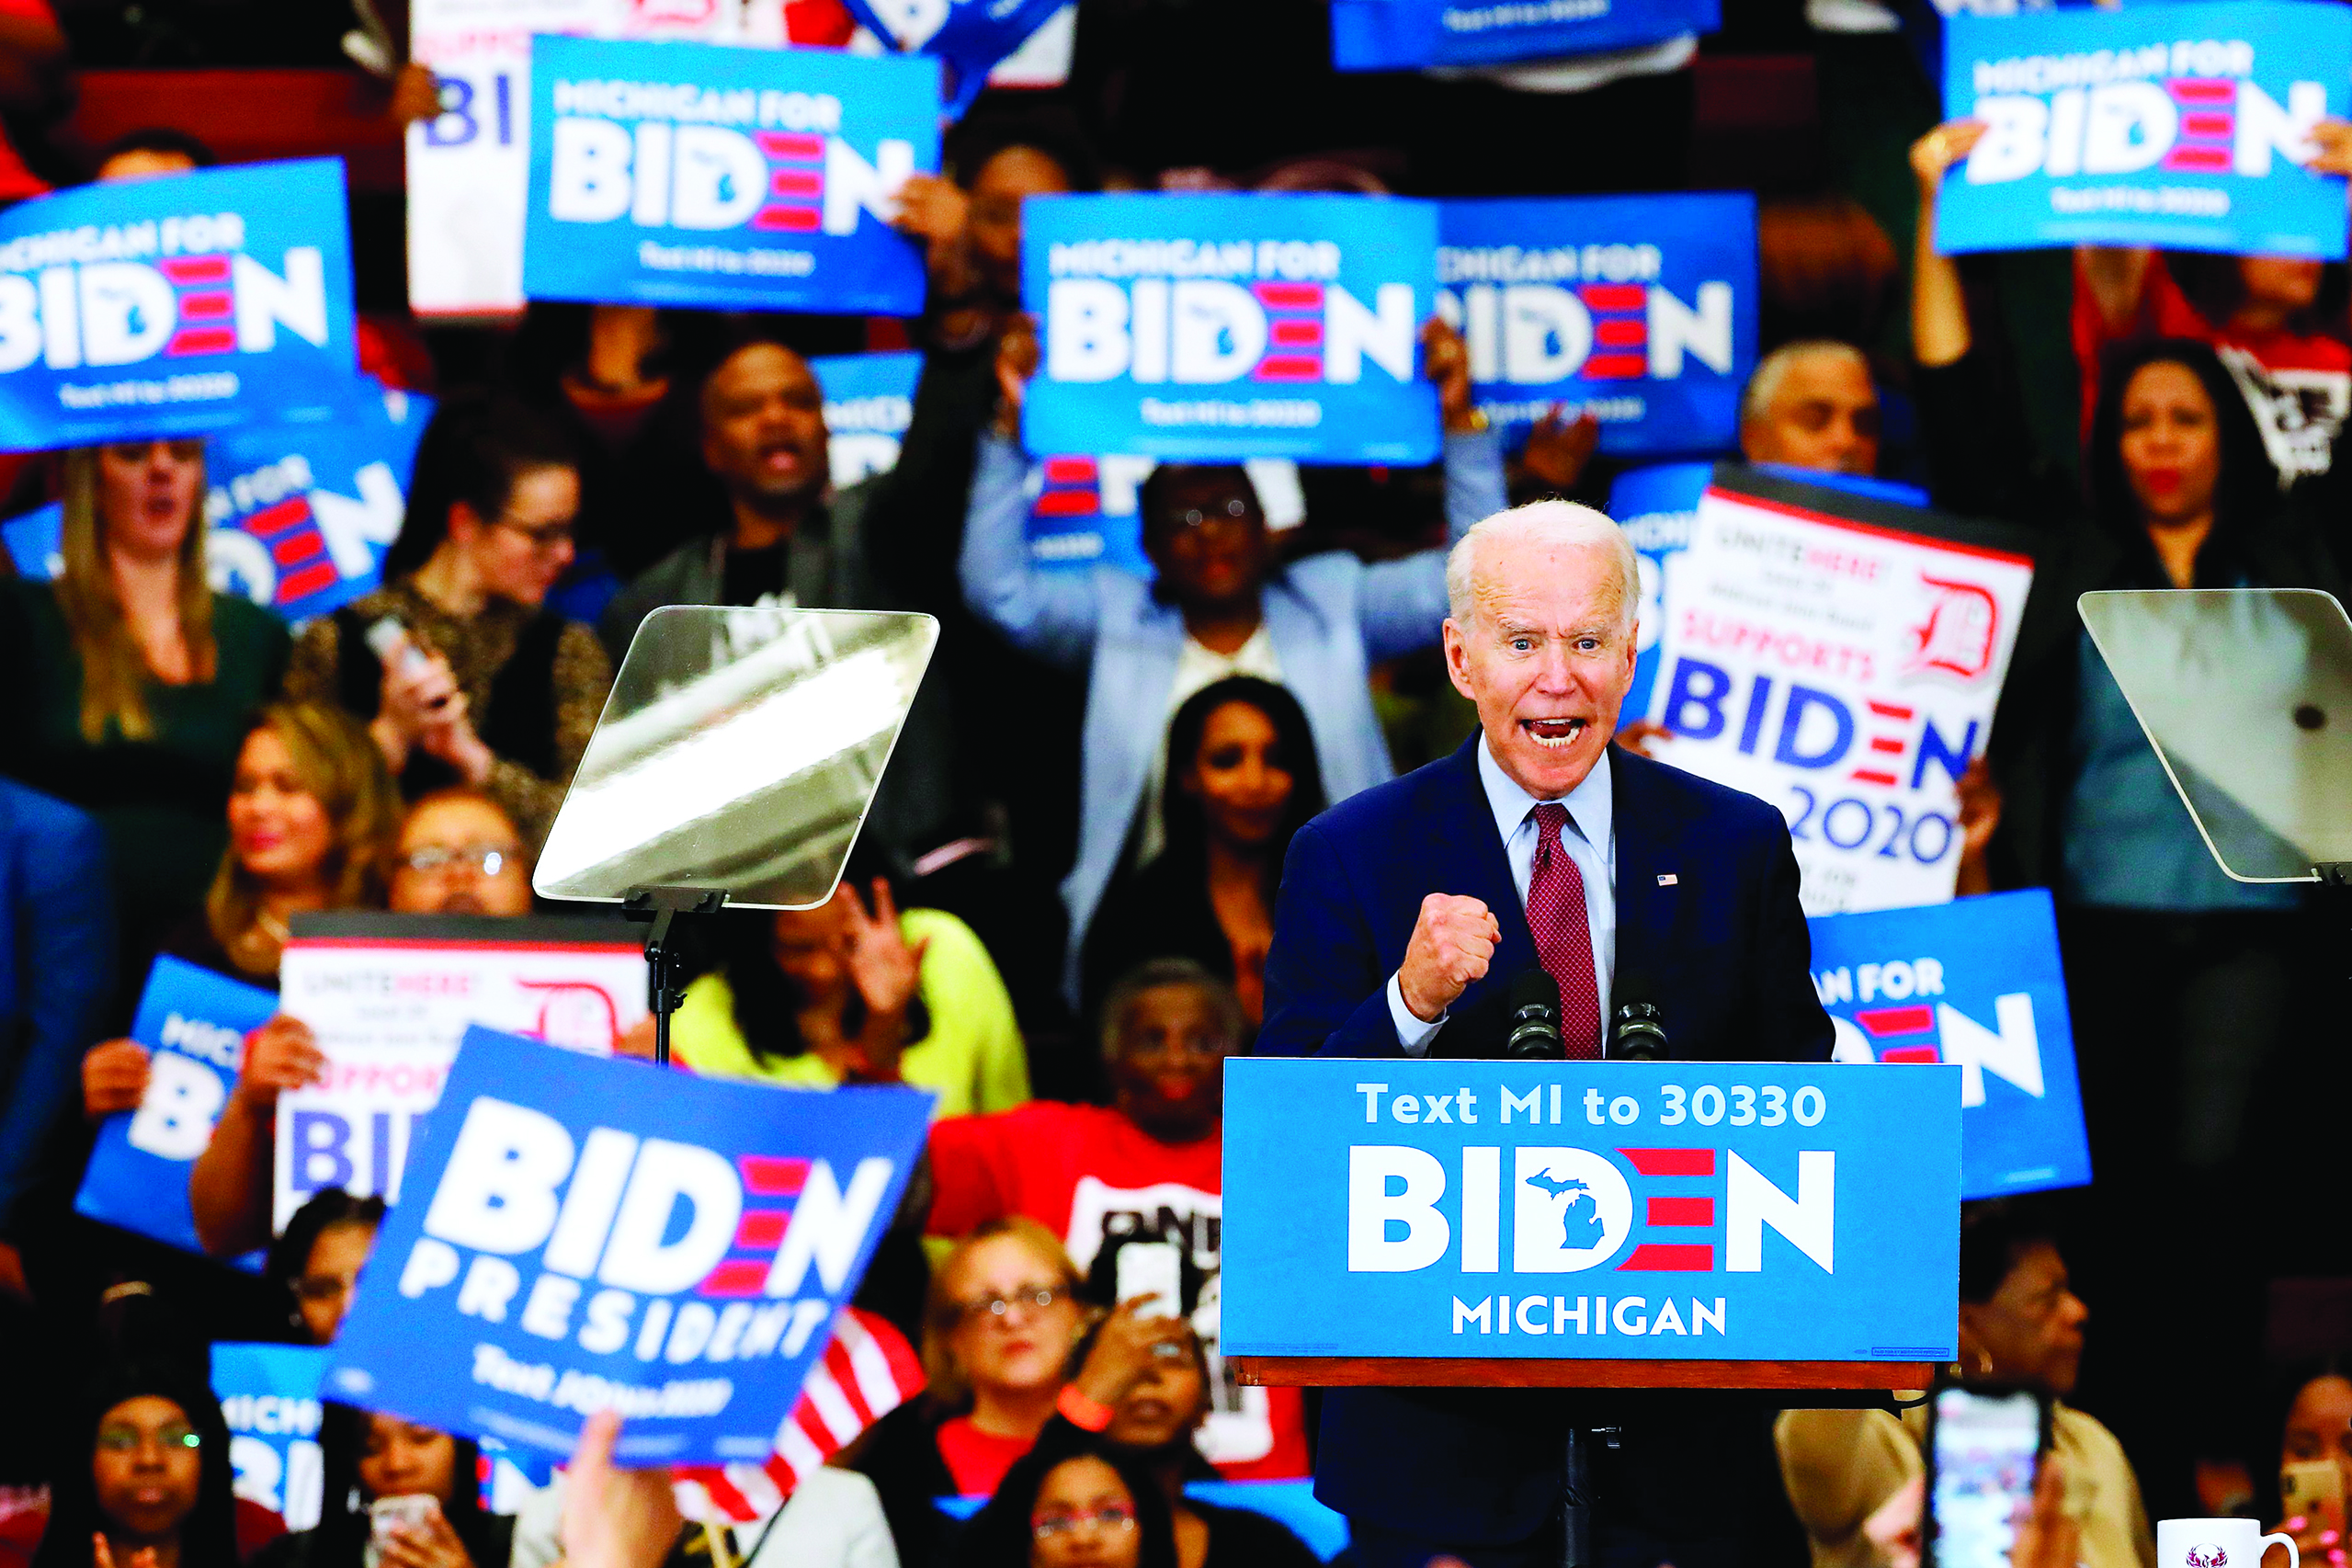 (FILES) In this file photo taken on March 09, 2020 Democratic presidential candidate former Vice President Joe Biden gestures as he speaks during a campaign rally at Renaissance High School in Detroit, Michigan. - Joe Biden won the Arizona Democratic primary over Bernie Sanders, giving him a sweep of the three US states which voted on March 17, 2020, TV networks said. With 56 percent of precincts reporting in Arizona, Biden led Sanders by 42.6 percent to 30.3 percent, according to New York Times figures.nBiden also won primaries in Florida and Illinois on Tuesday to open up a commanding lead over Sanders in the race for the Democratic presidential nomination. (Photo by JEFF KOWALSKY / AFP)